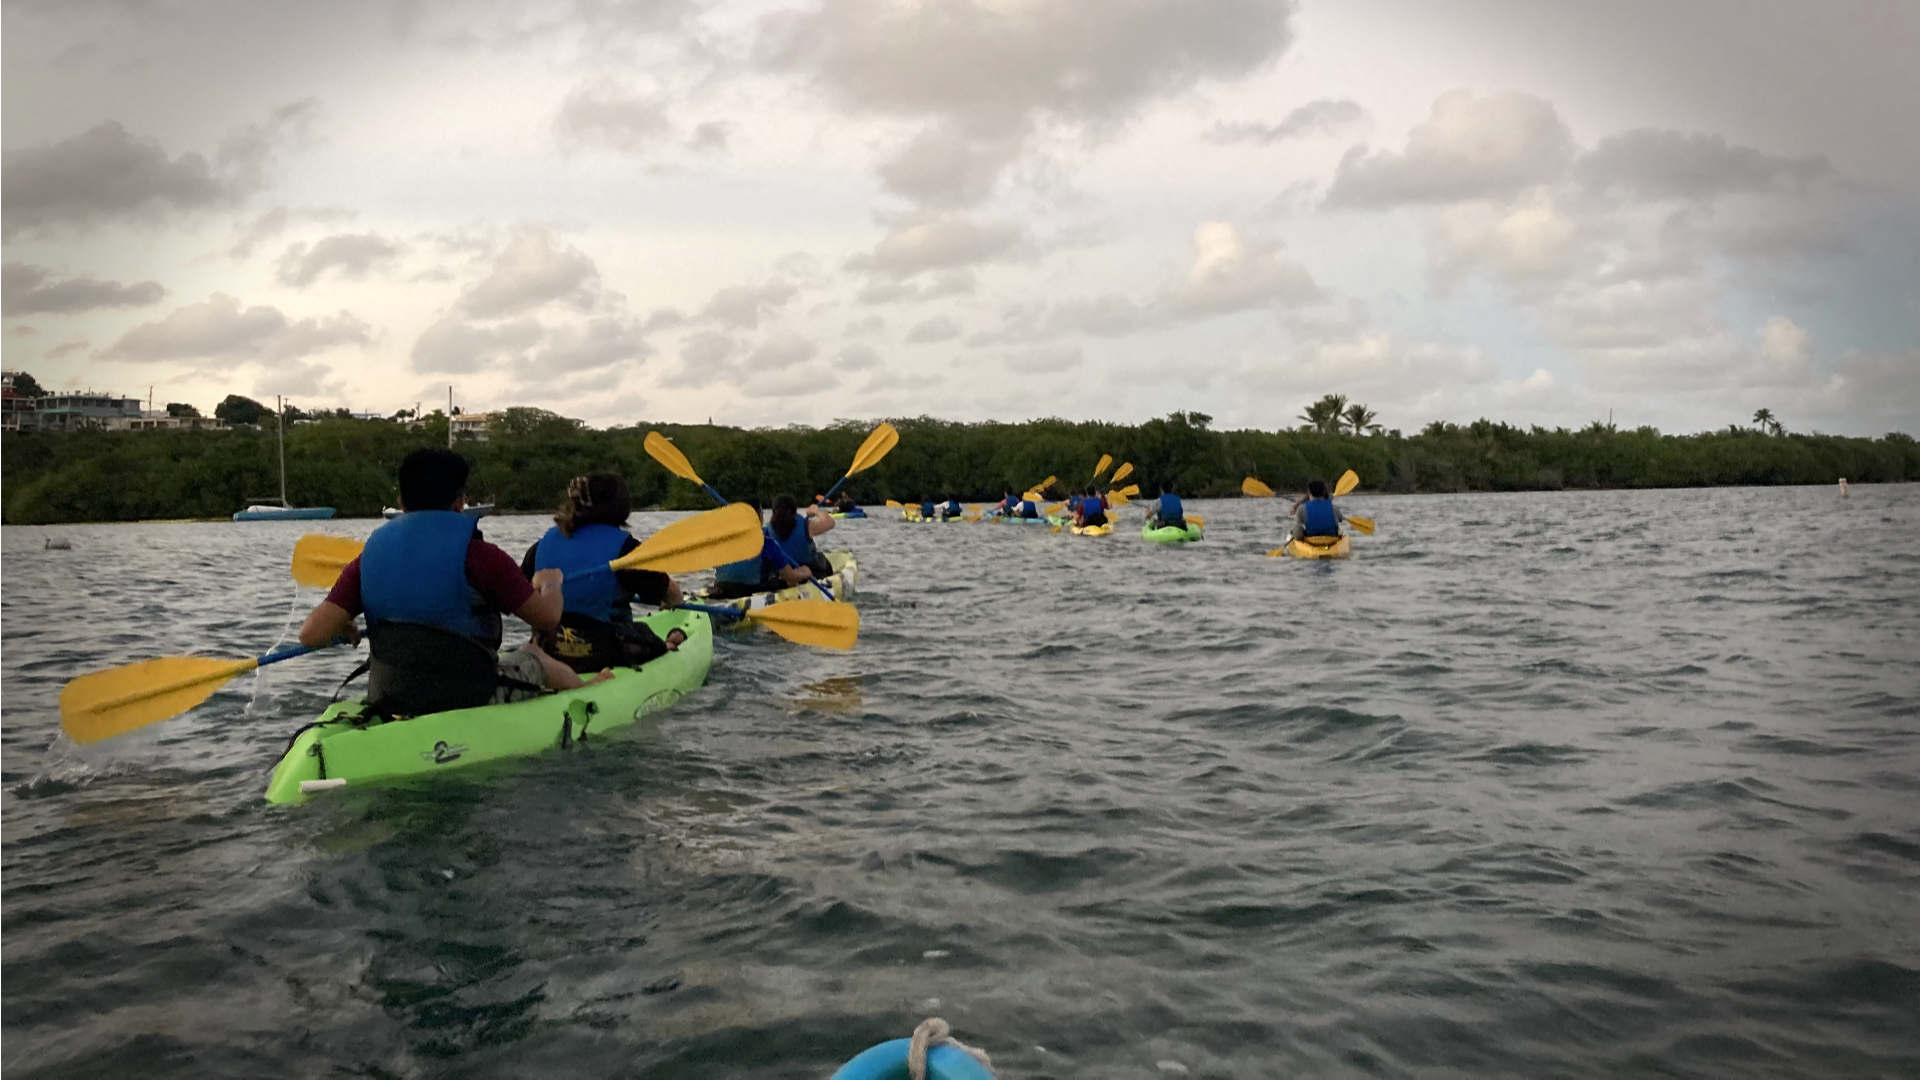 The sunset was on the way for our nighttime kayak tour of a bioluminescent bay in Puerto Rico!